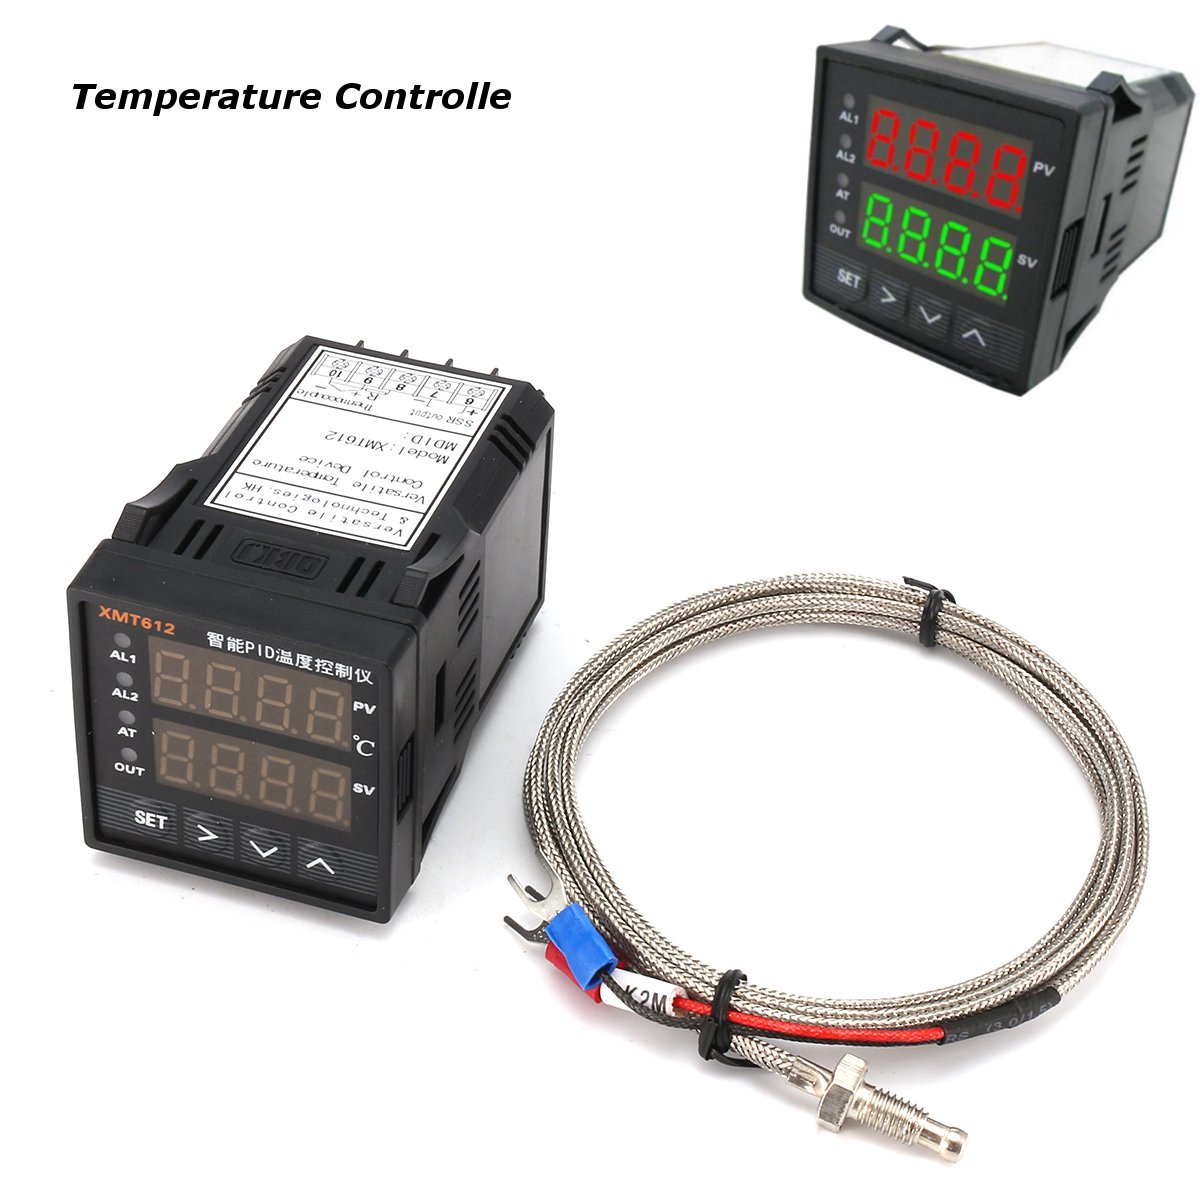 

XMT612 Dual Digital F/C PID Celsius Fahrenheit Temperature Controller with K Type Thermocouple